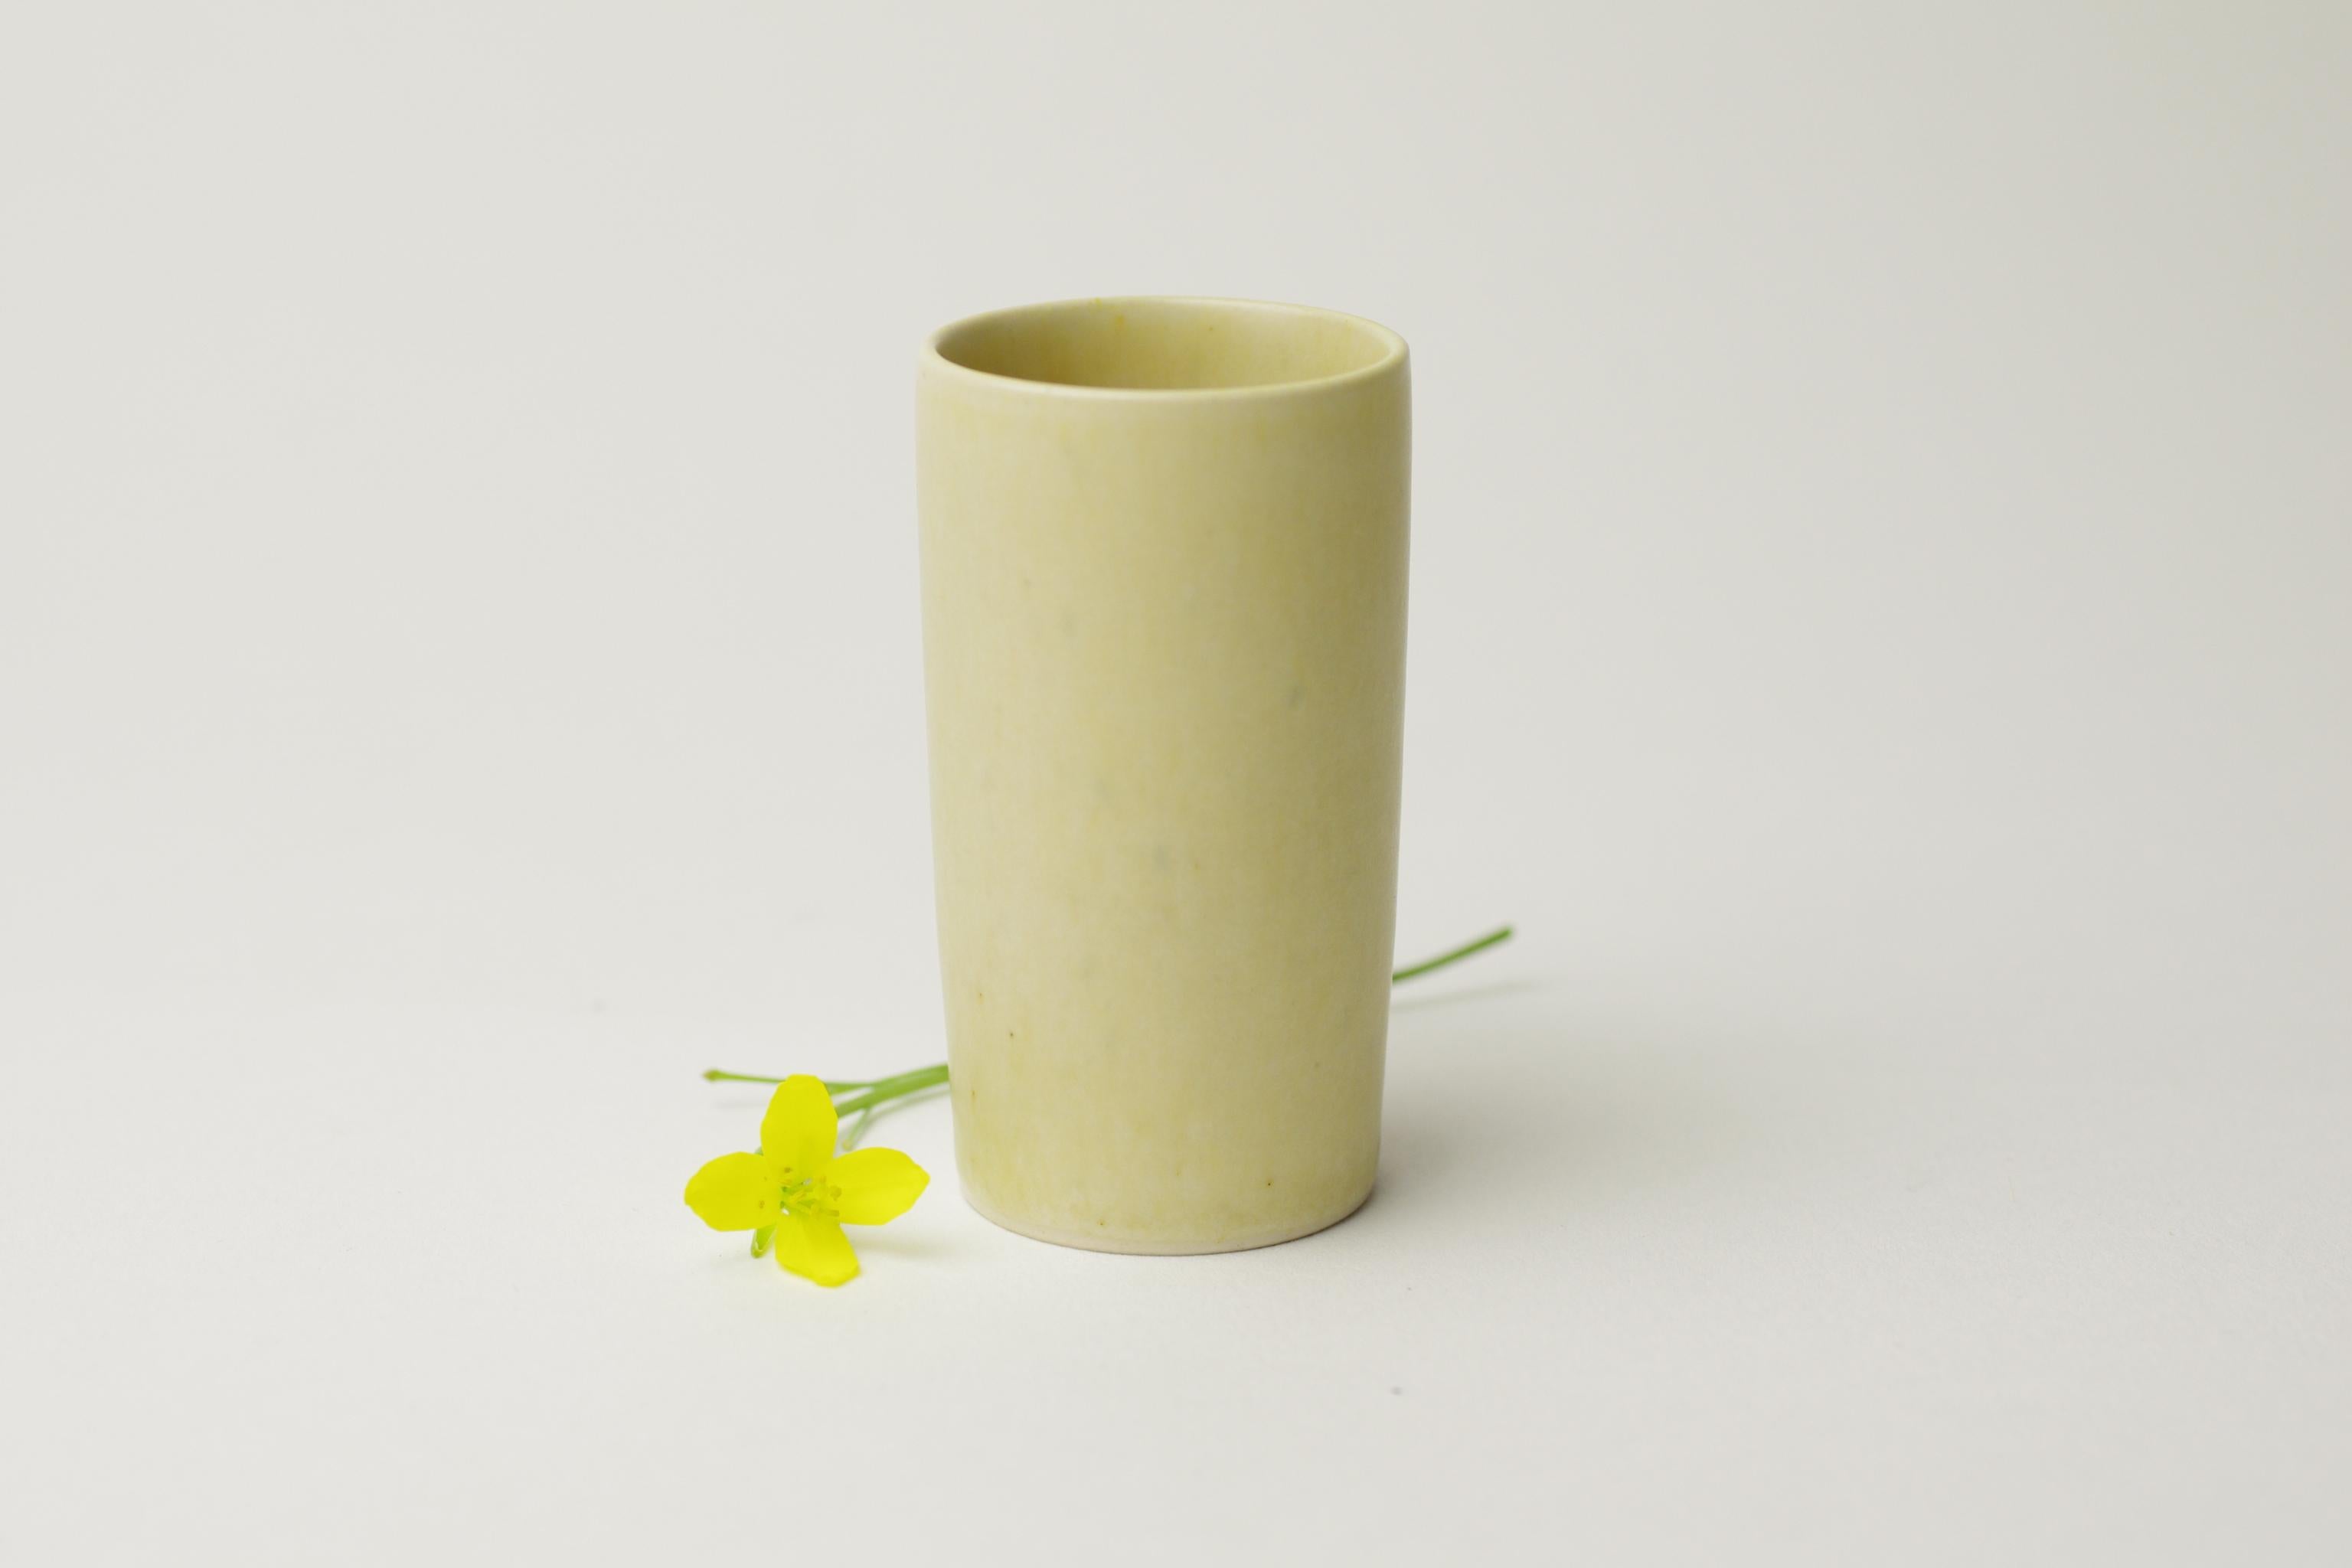 Product Description:
This small vase was designed by Per Linnemann-Schmidt for his company Palshus. Per established Palshus together with his wife Annelise in 1949 in Sengløse (close to Copenhagen). Palhus closed its doors in 1973, three years after